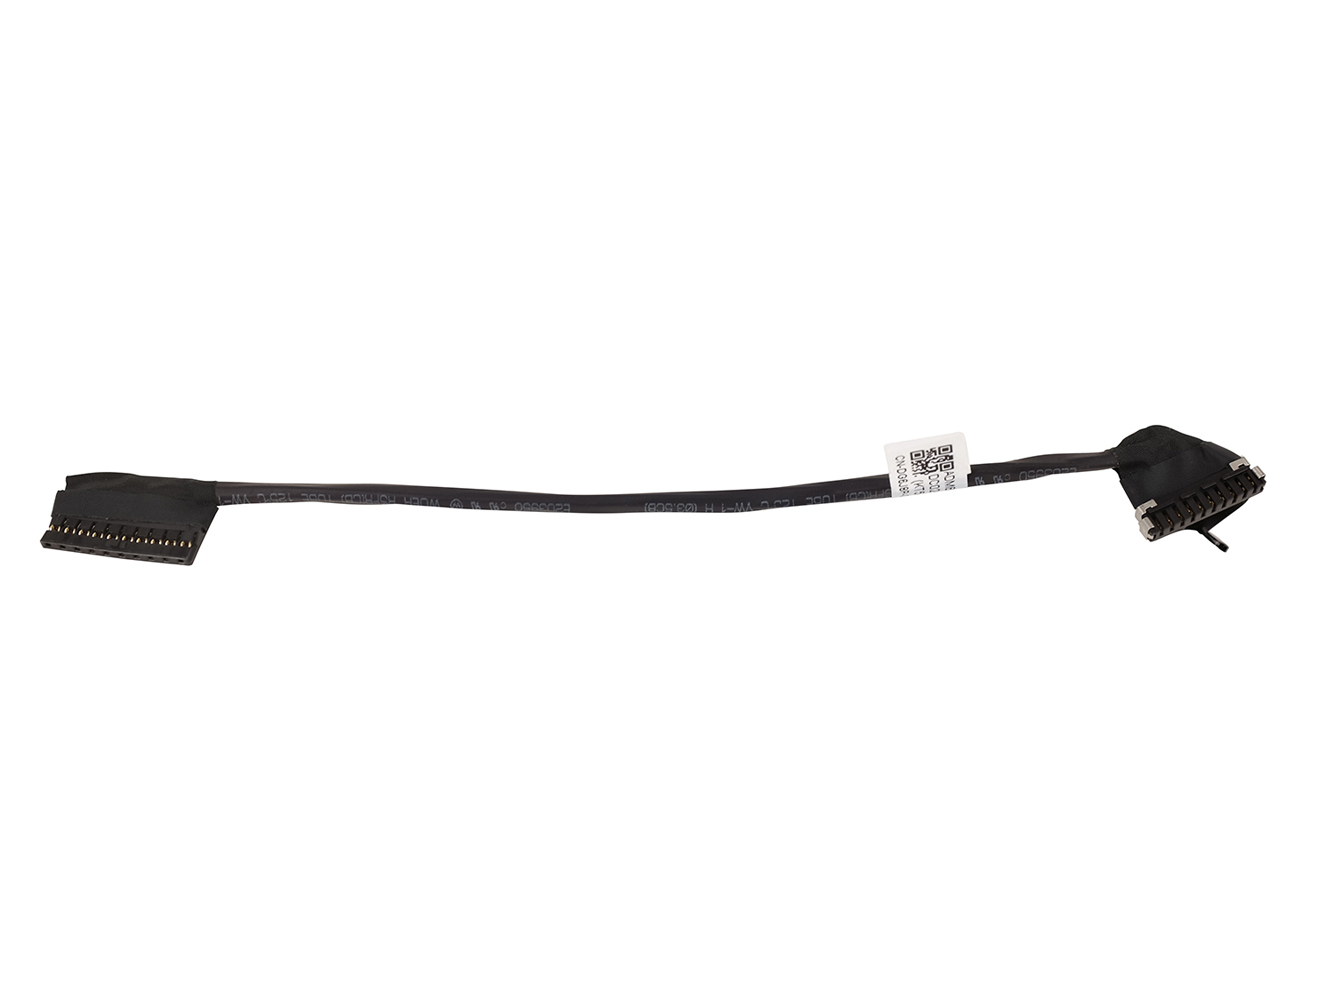 Replacement for Dell Latitude E5570, Precision 3510 Battery Cable, P/N: ADM80, 0G6J8P, DC020027Q00